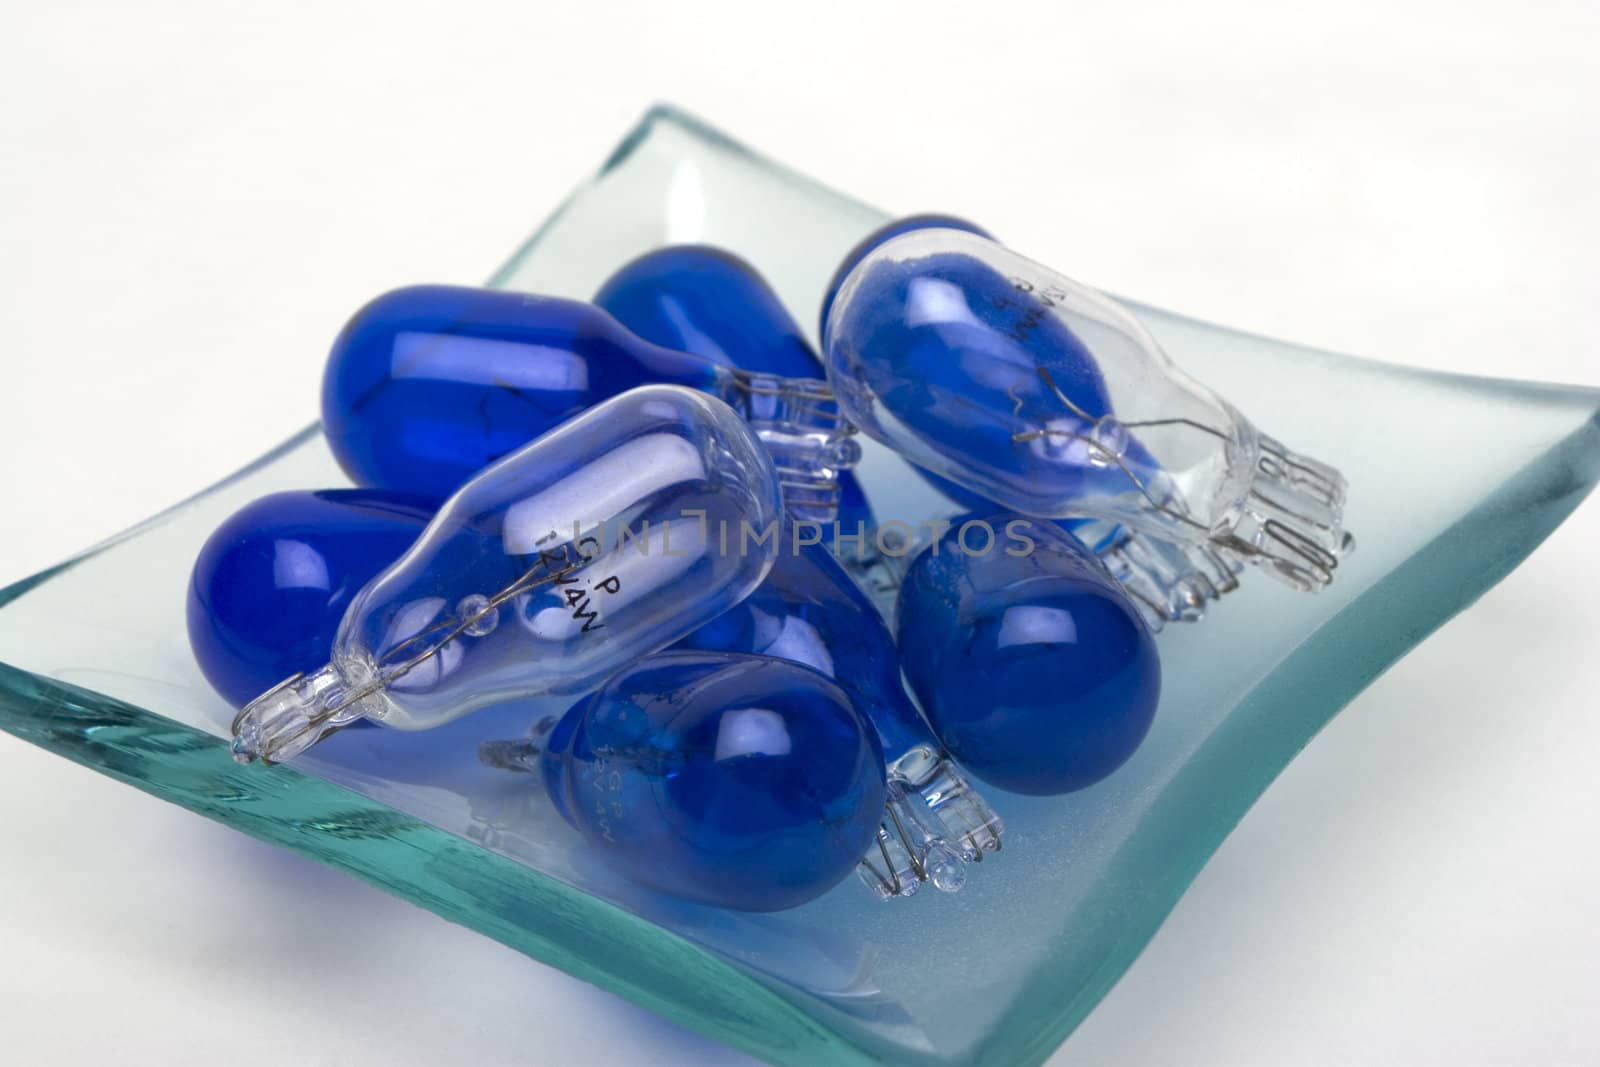 Blue and transparent T5 type bulb presented on a sushi plate